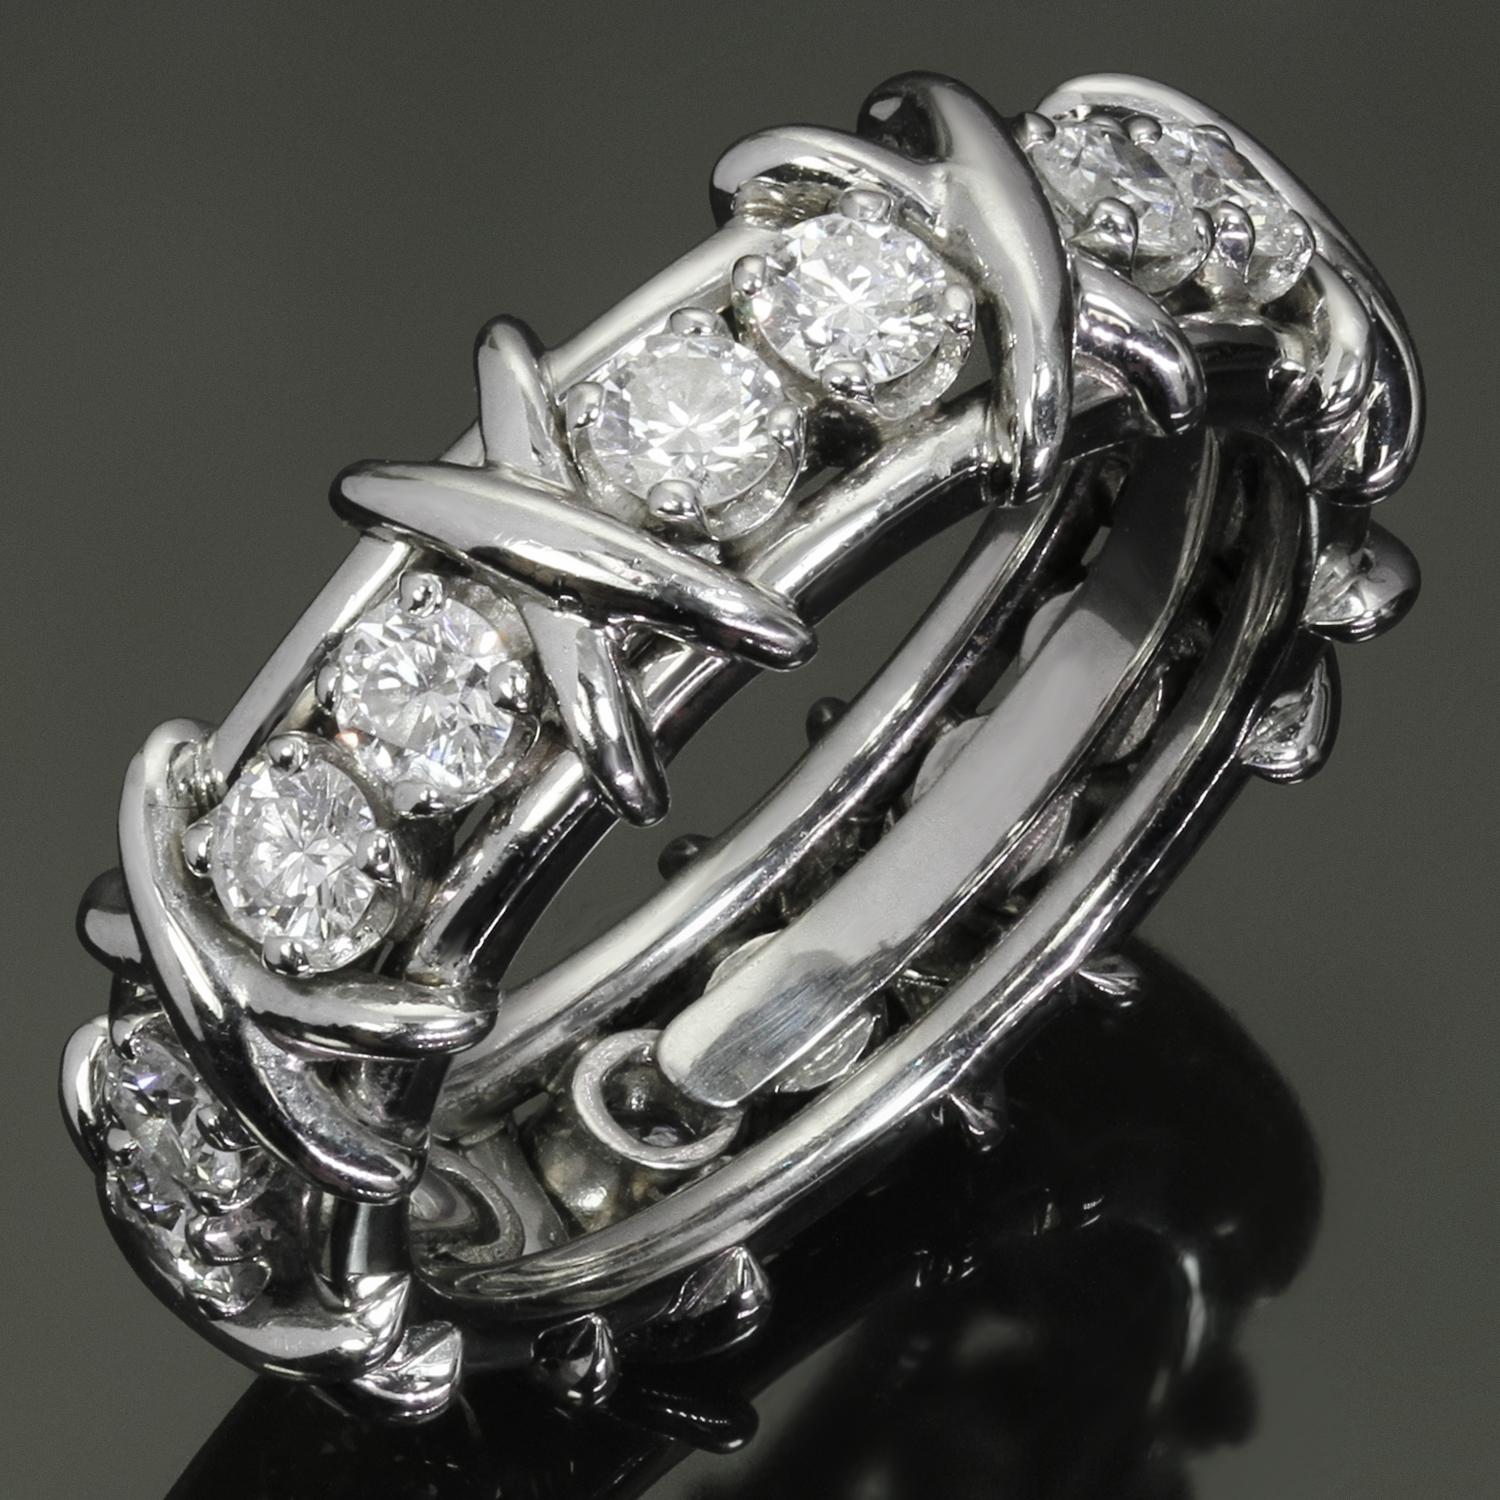 This iconic 16-stone Tiffany & Co. ring was designed by Jean Schlumberger features the classic X motif crafted in platinum and set with brilliant-cut round  F-G VVS2-VS1 diamonds weighing an estimated 1.20 carats. Made in United States circa 2010s.